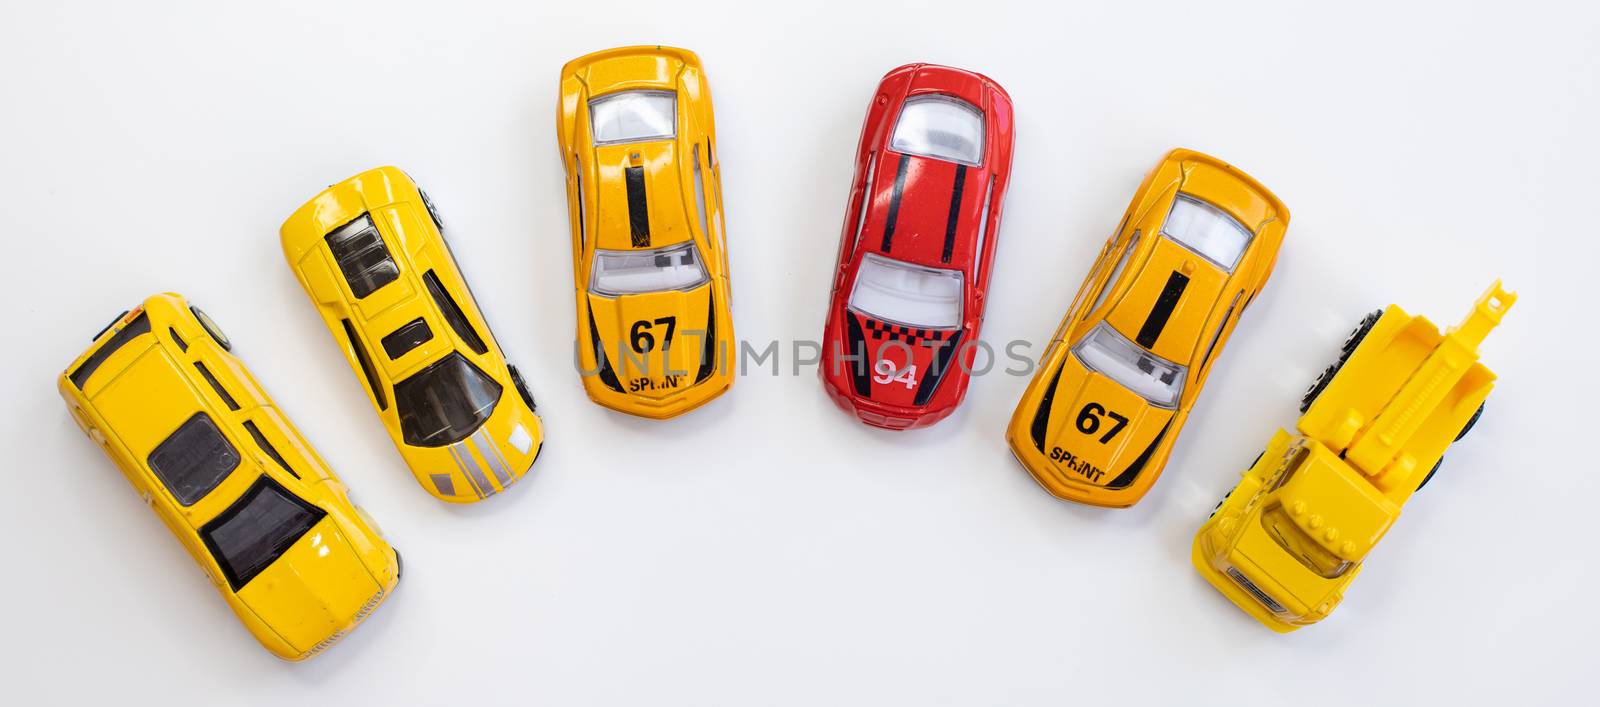 A red car toy surrounded by orange cars by tadeush89